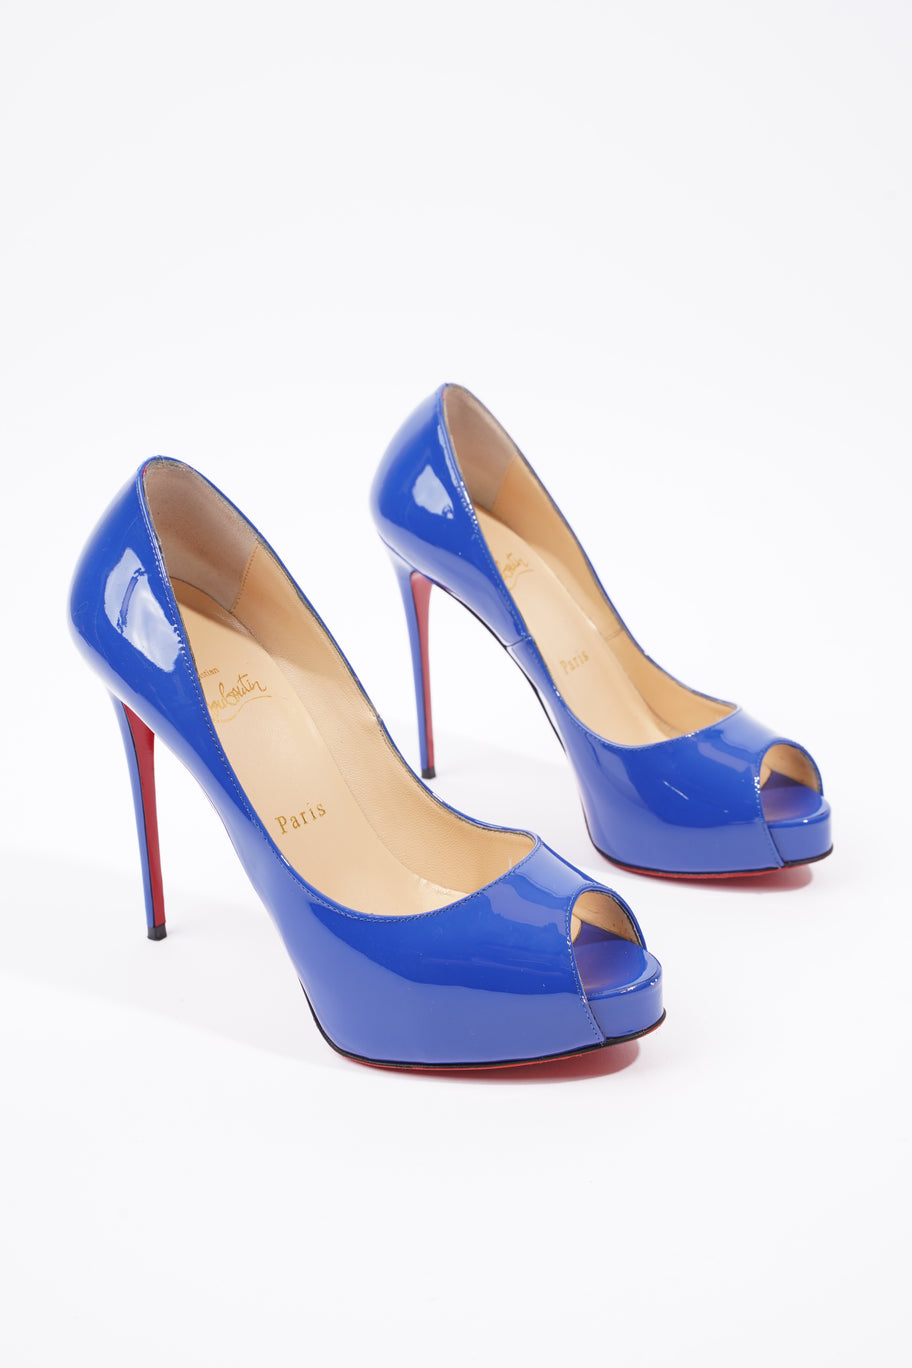 New Very Prive Heels 120 Blue Patent Leather EU 37.5 UK 4.5 Image 3